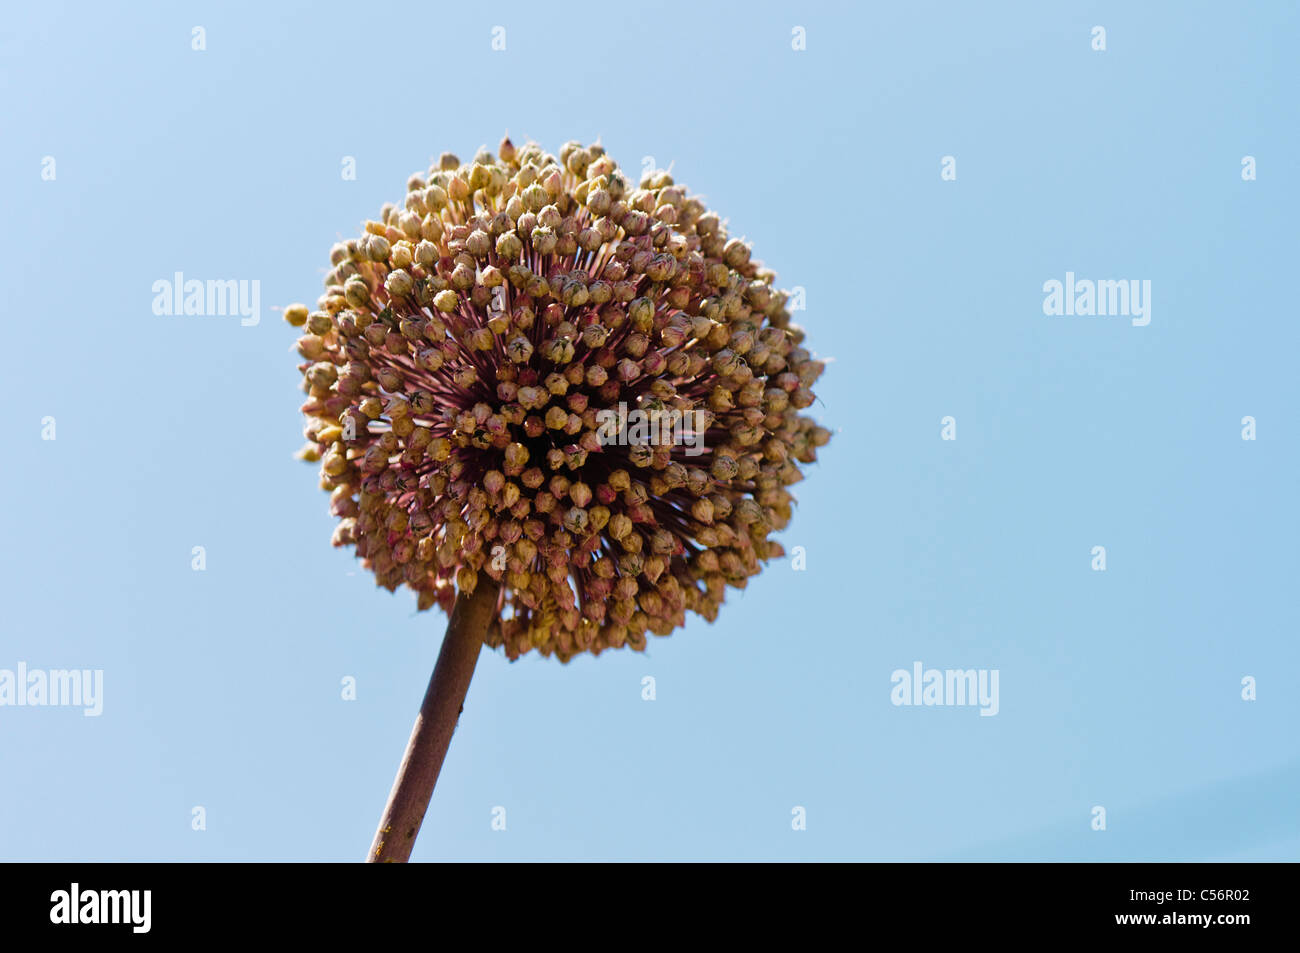 Allium flower about to drop seed heads Stock Photo